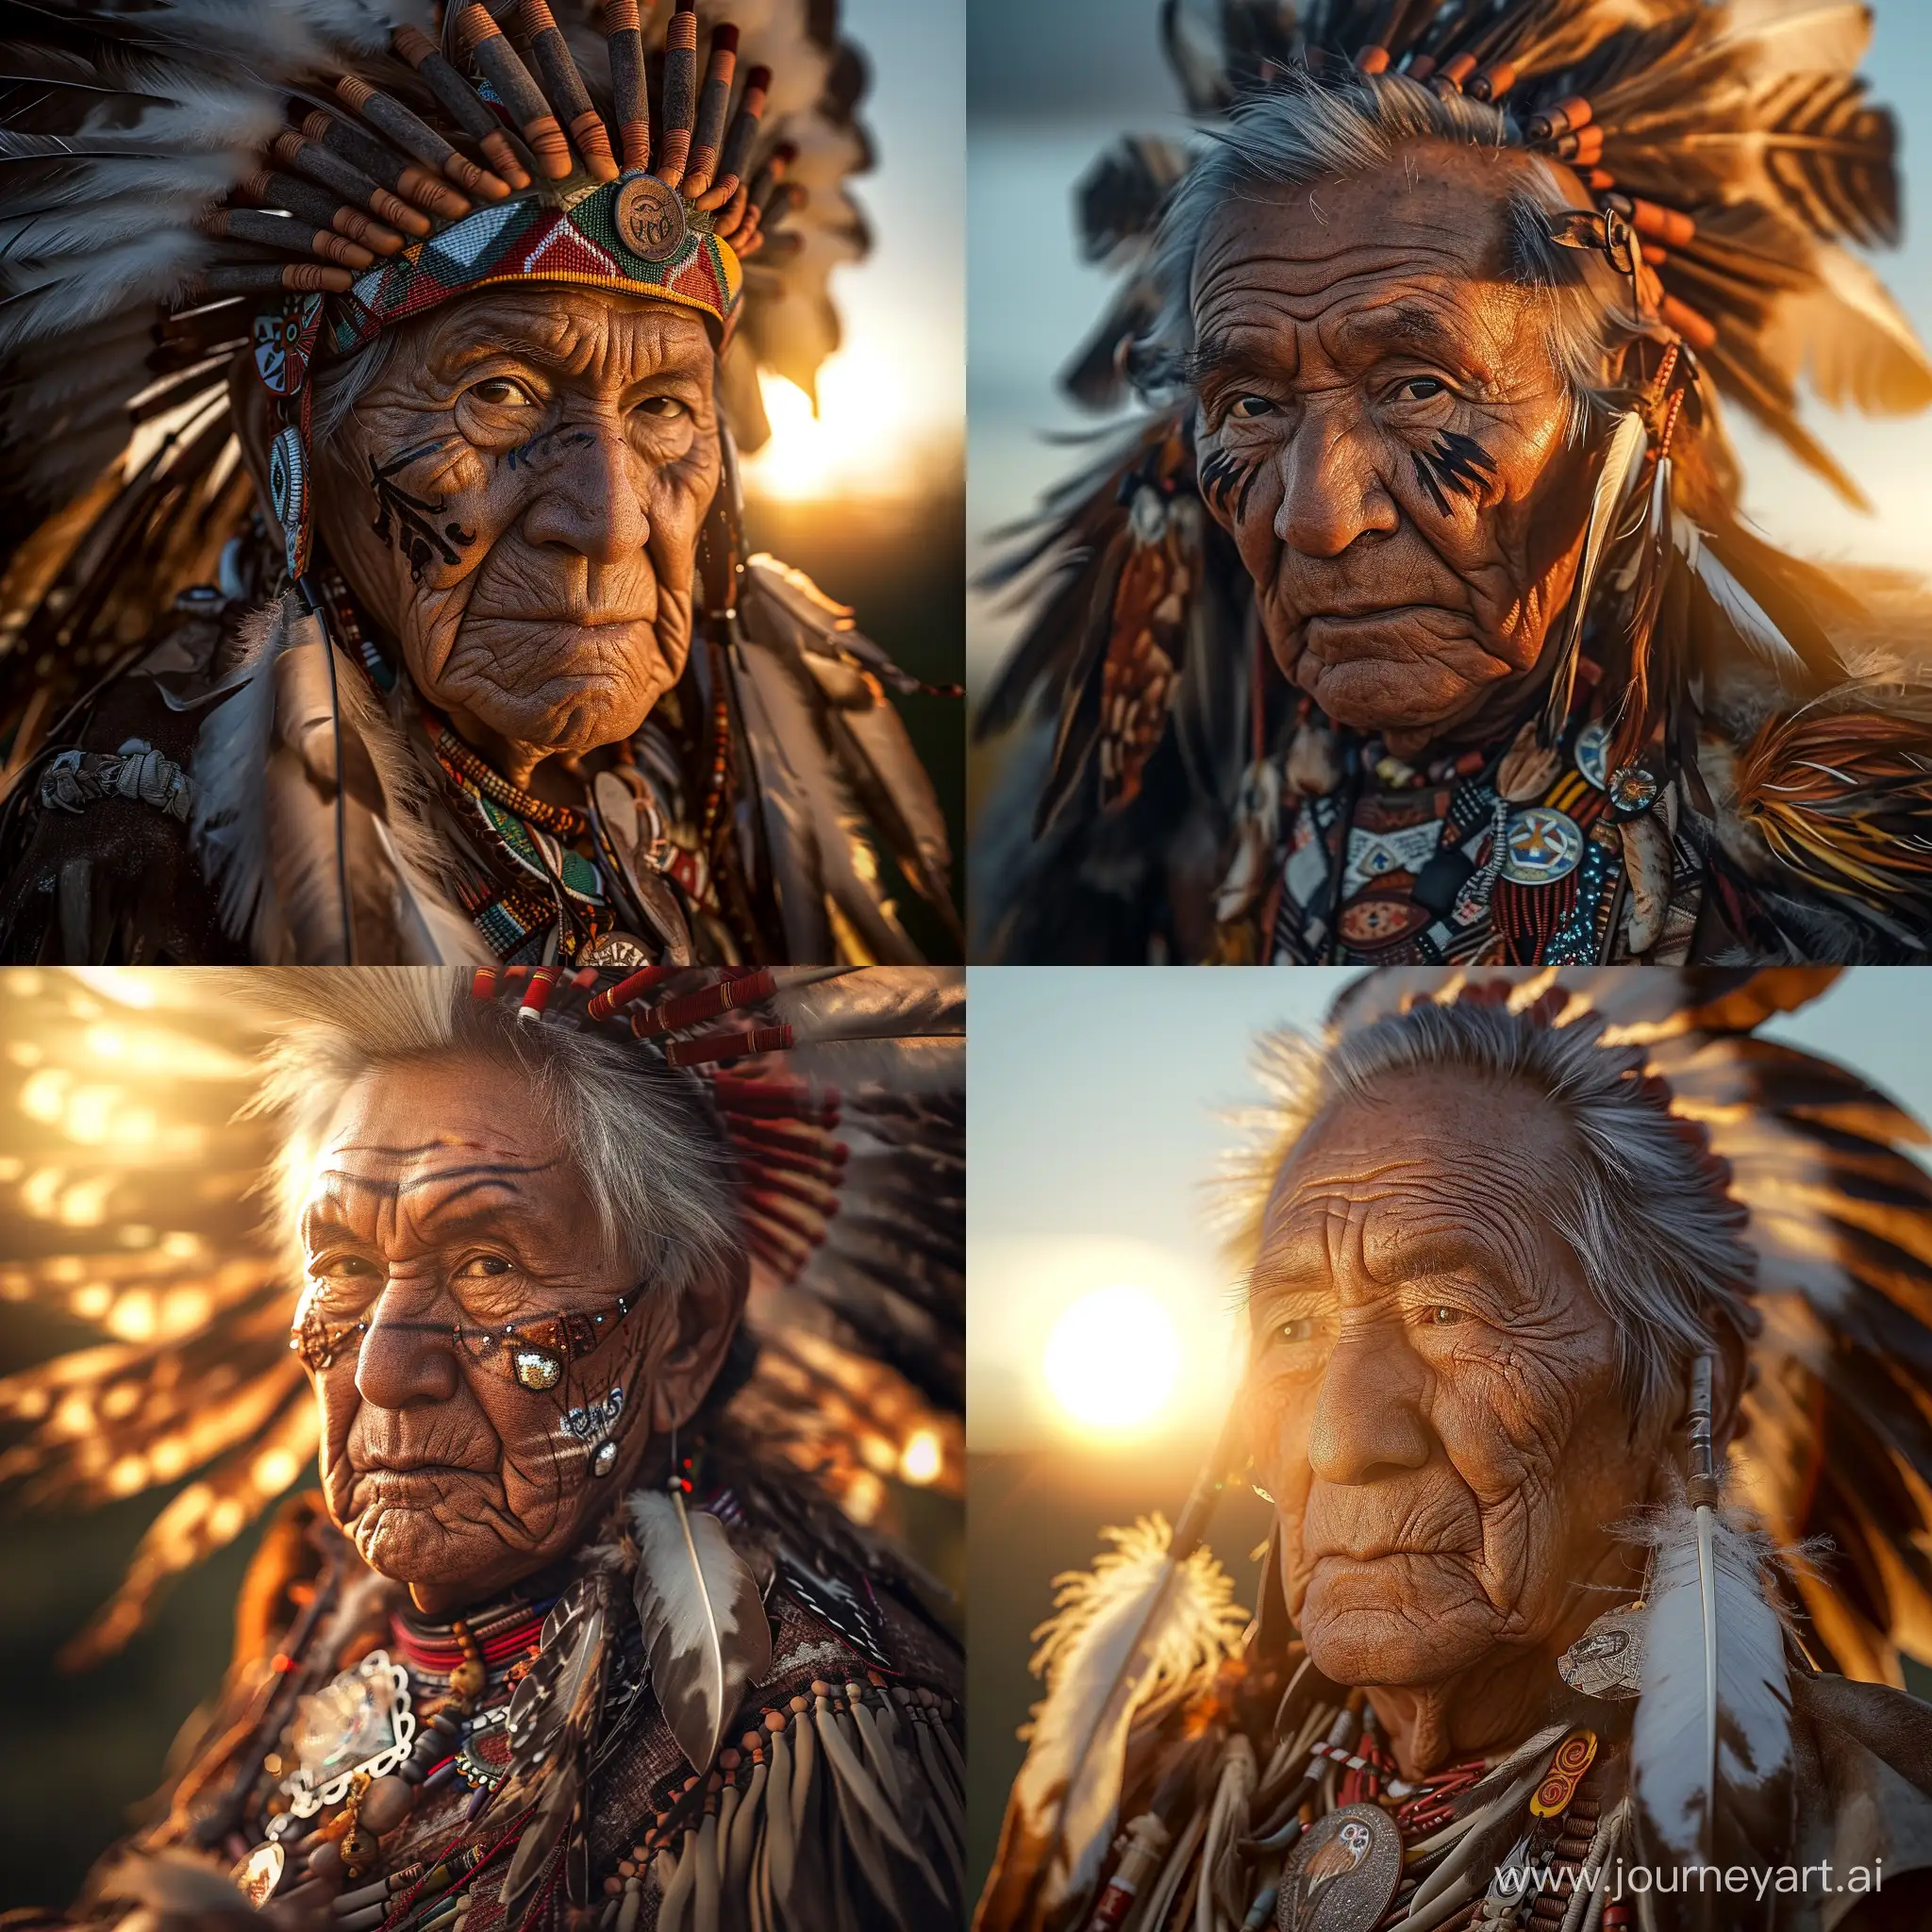 Elderly-Native-American-Embracing-Tradition-in-the-Sunset-Glow